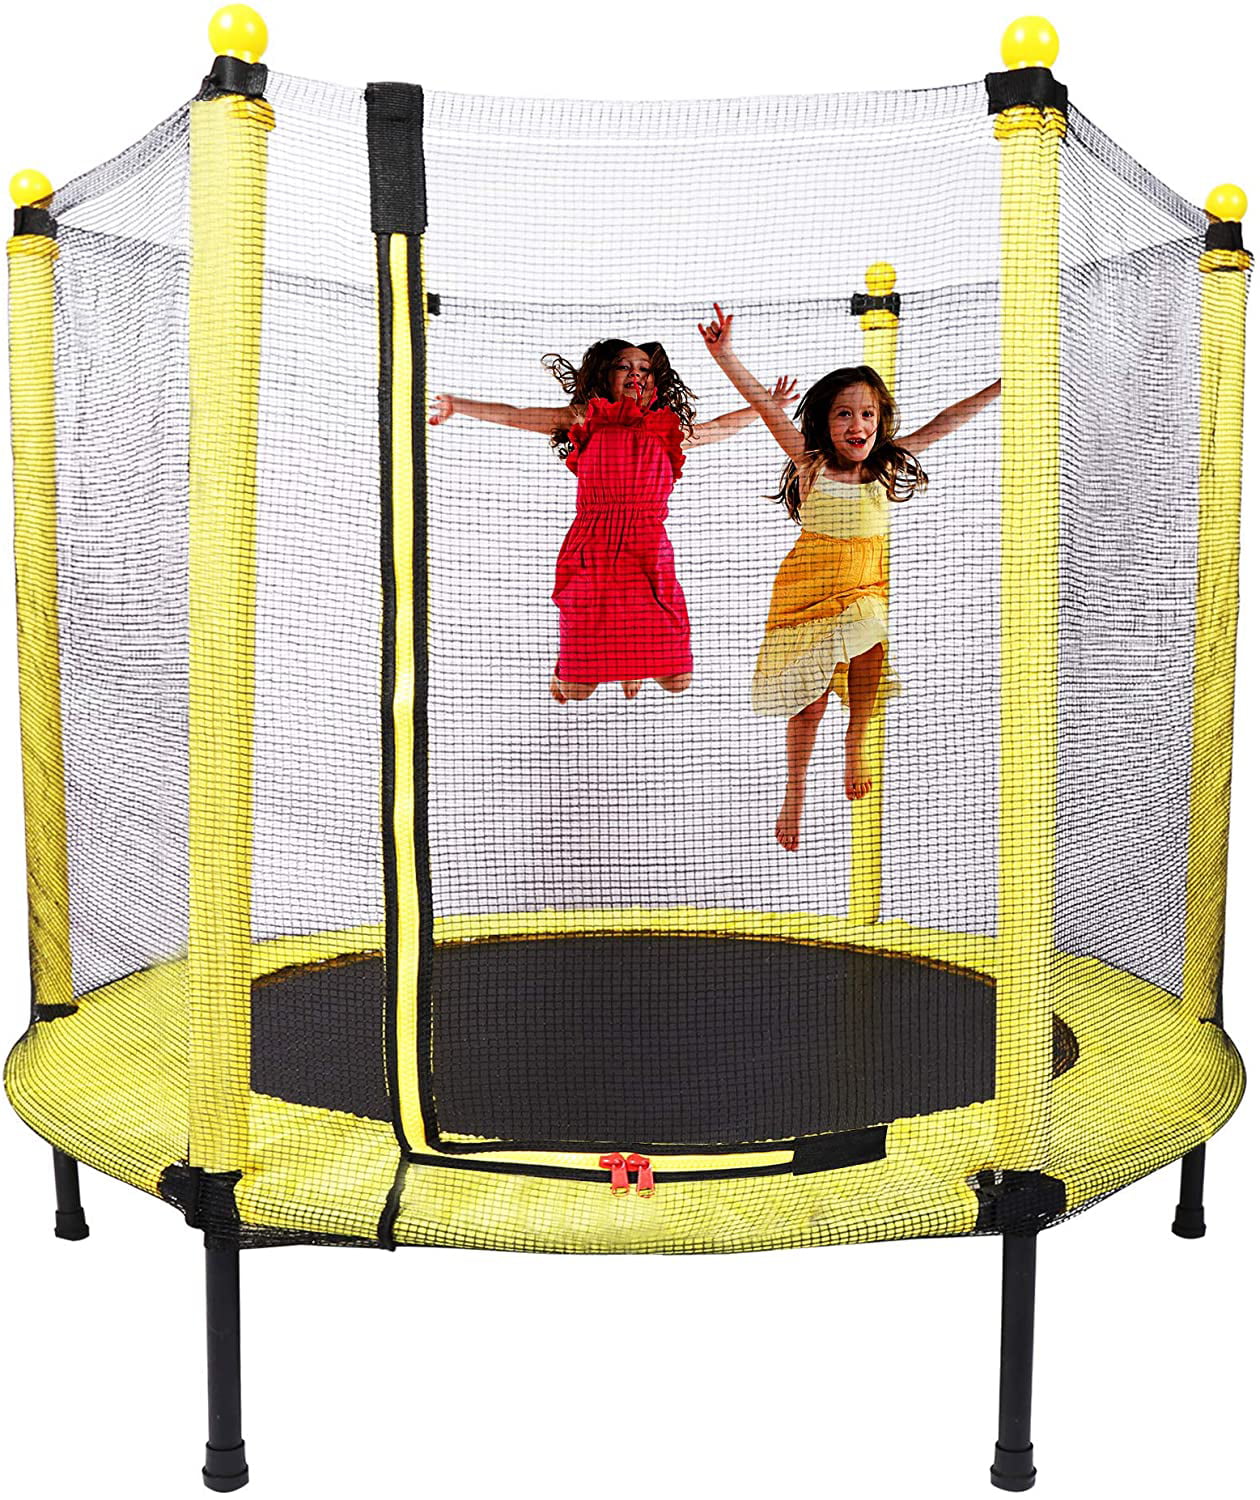 Kids Trampoline for Toddlers with Net,48in Toddler Trampoline with Enclosure,Mini Trampoeline Indoor